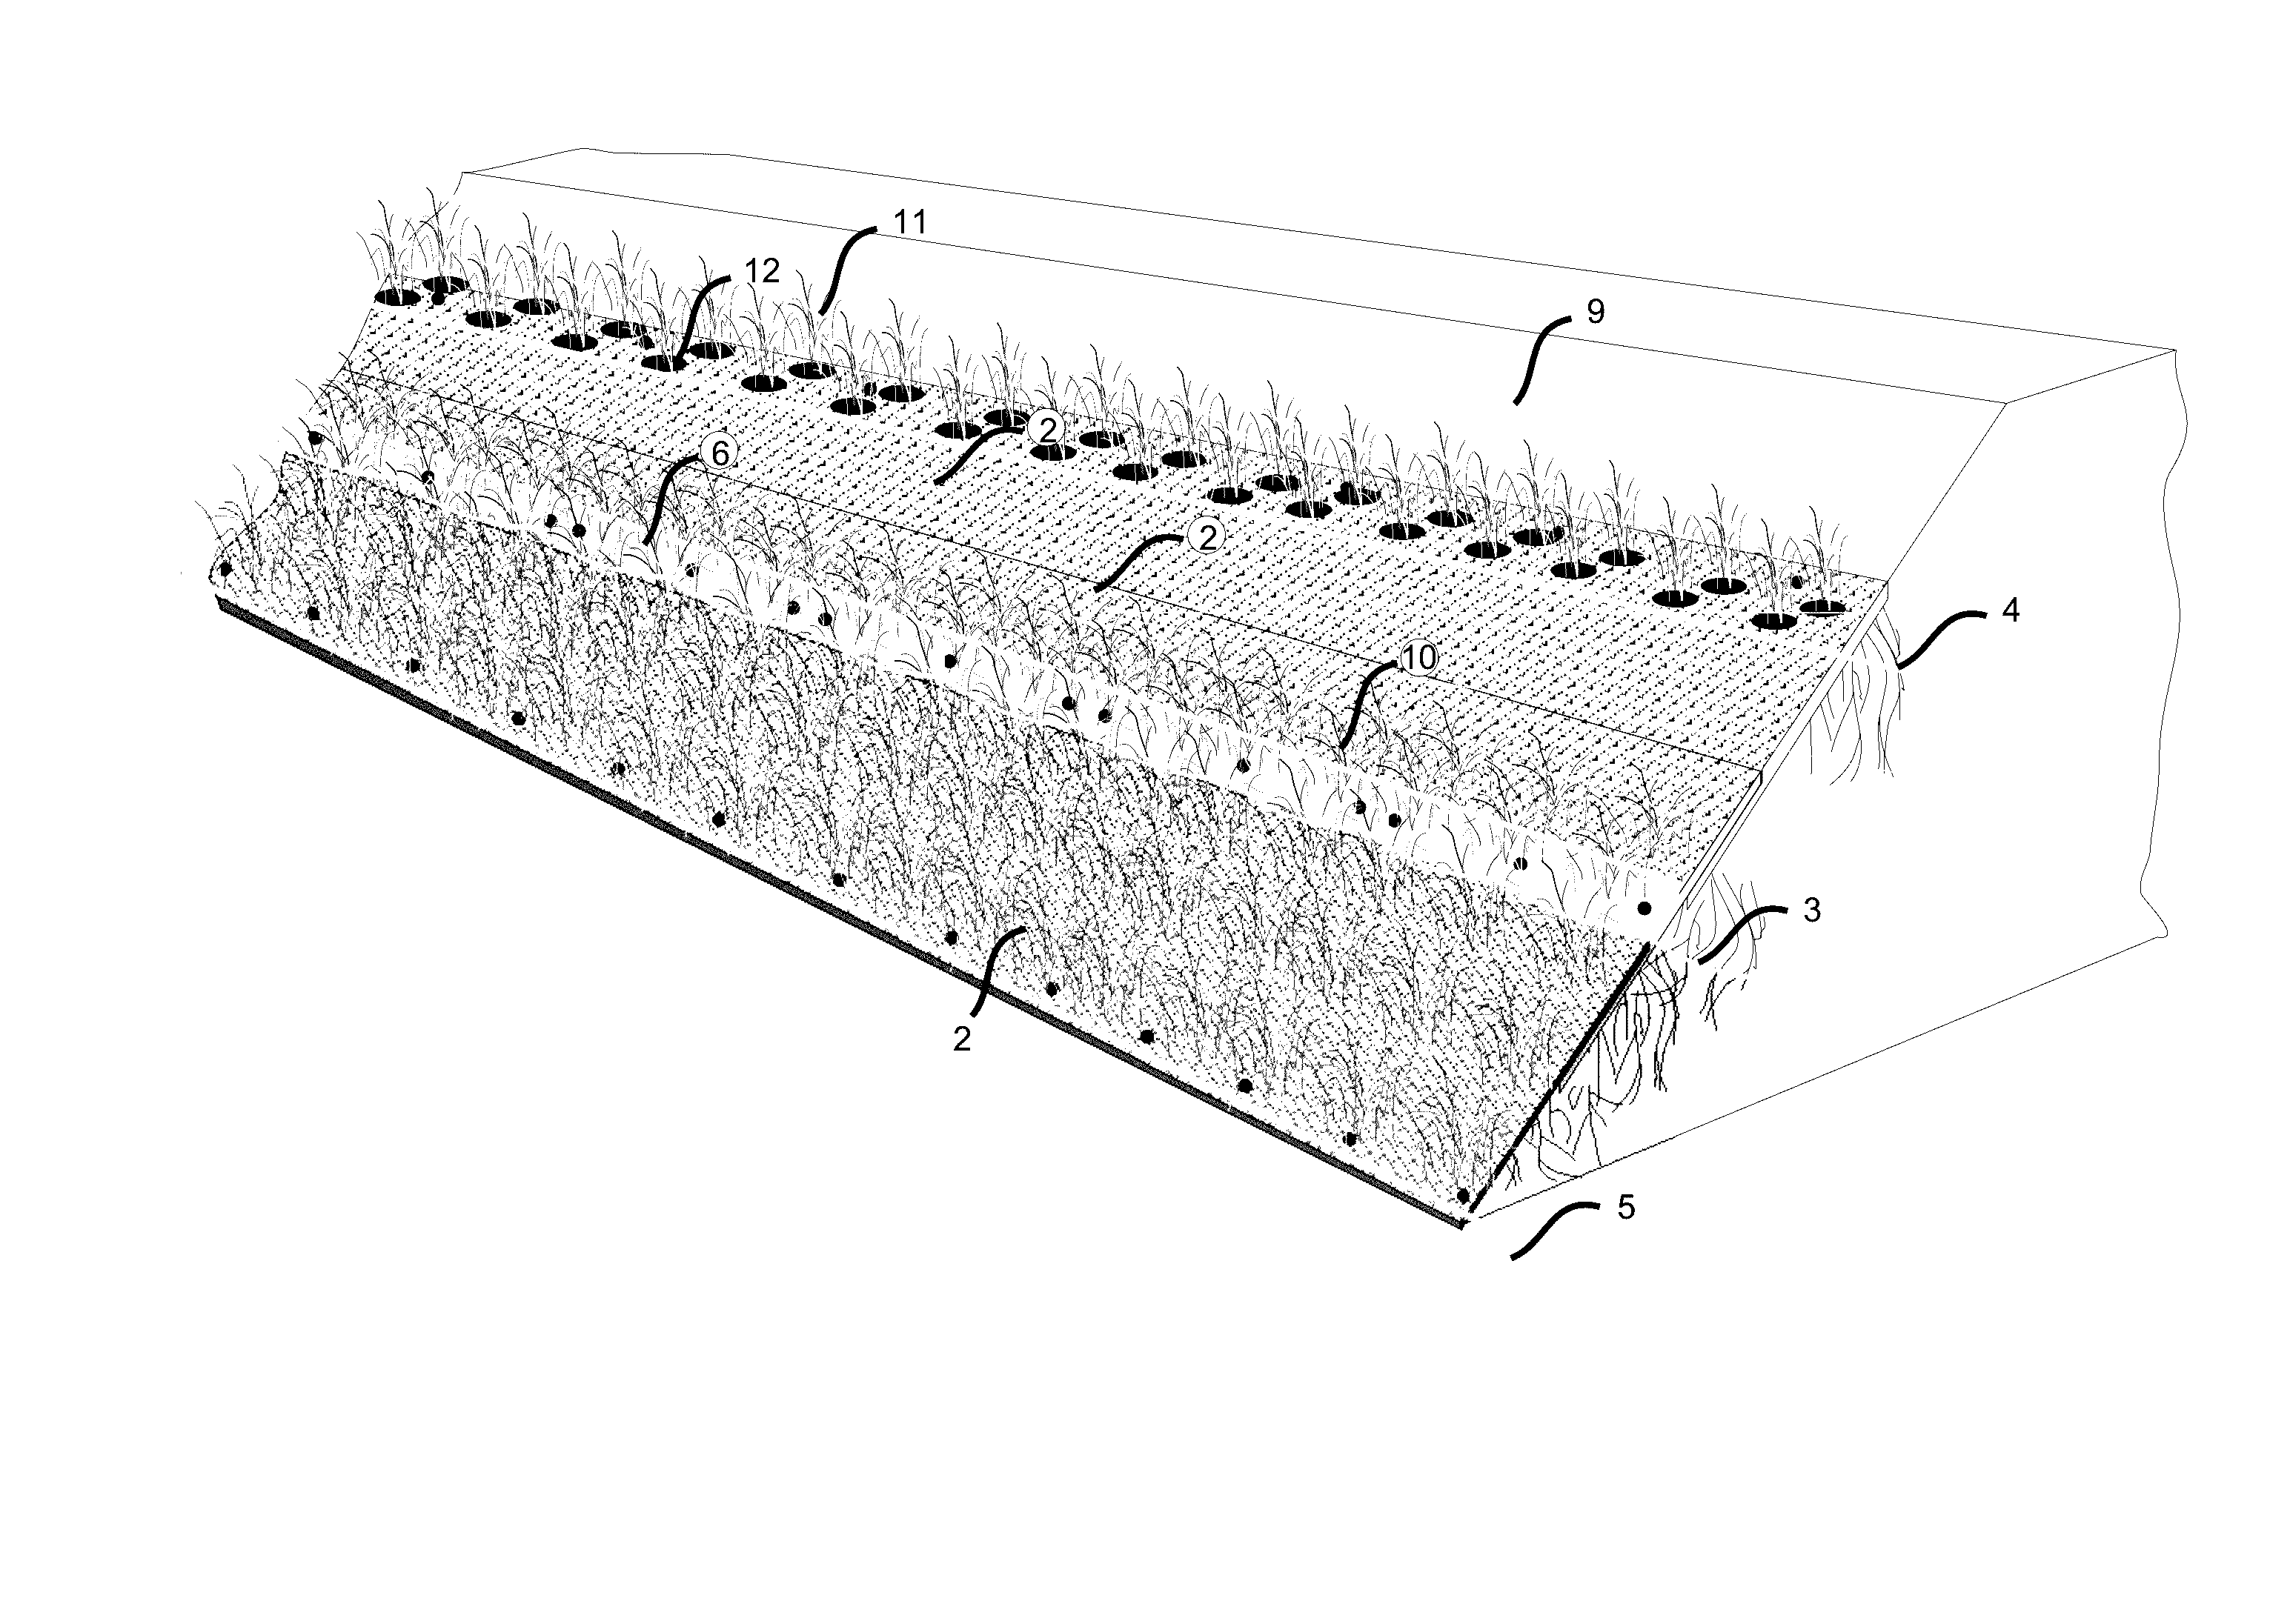 Living Shoreline Protection and Stabilization System and Method